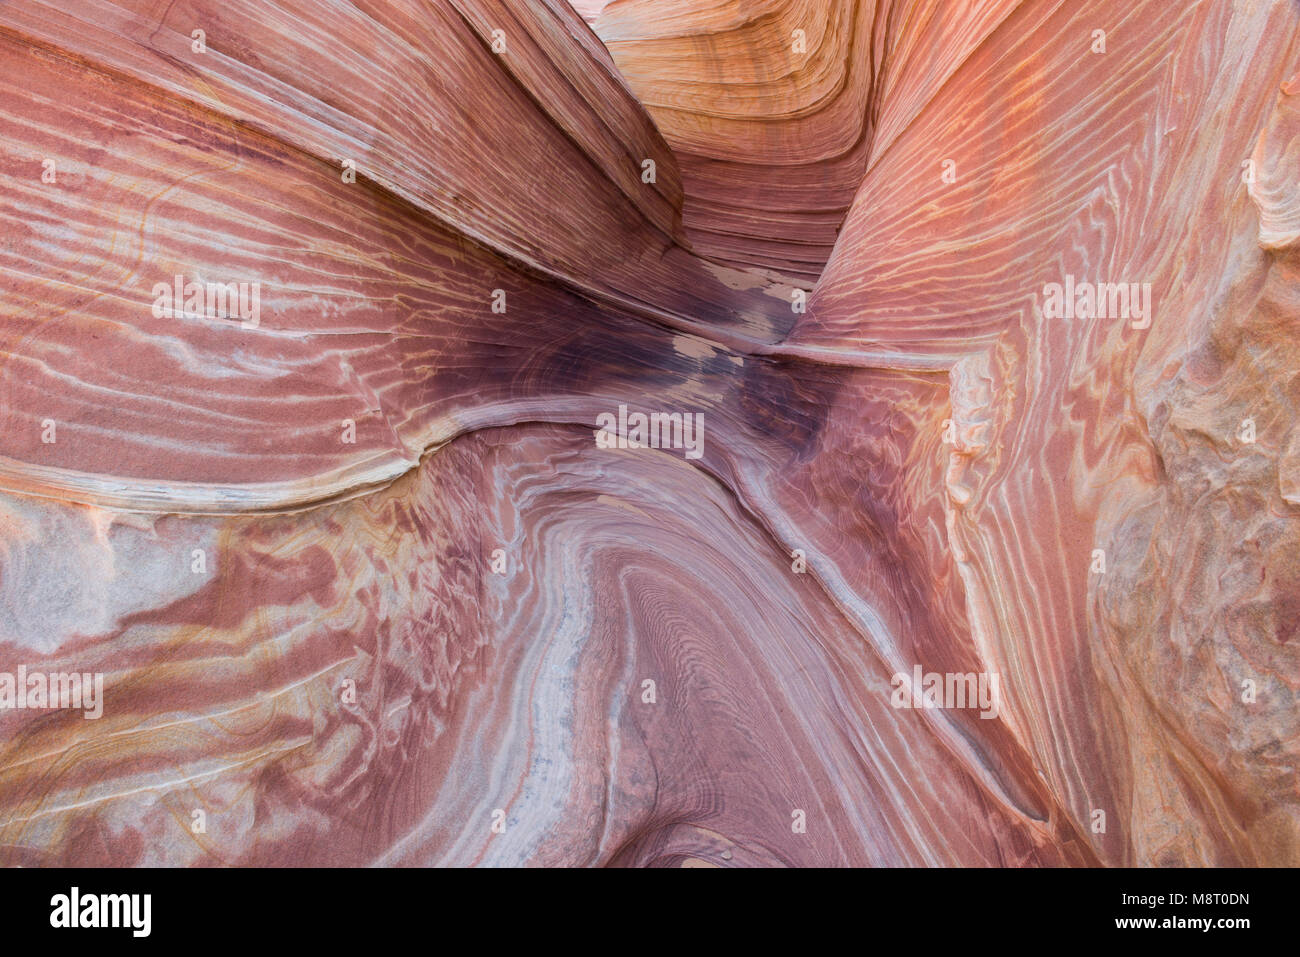 The Wave sandstone rock formation, located in Coyote Buttes North, Paria Canyon, Vermillion Cliffs Wilderness. Stock Photo